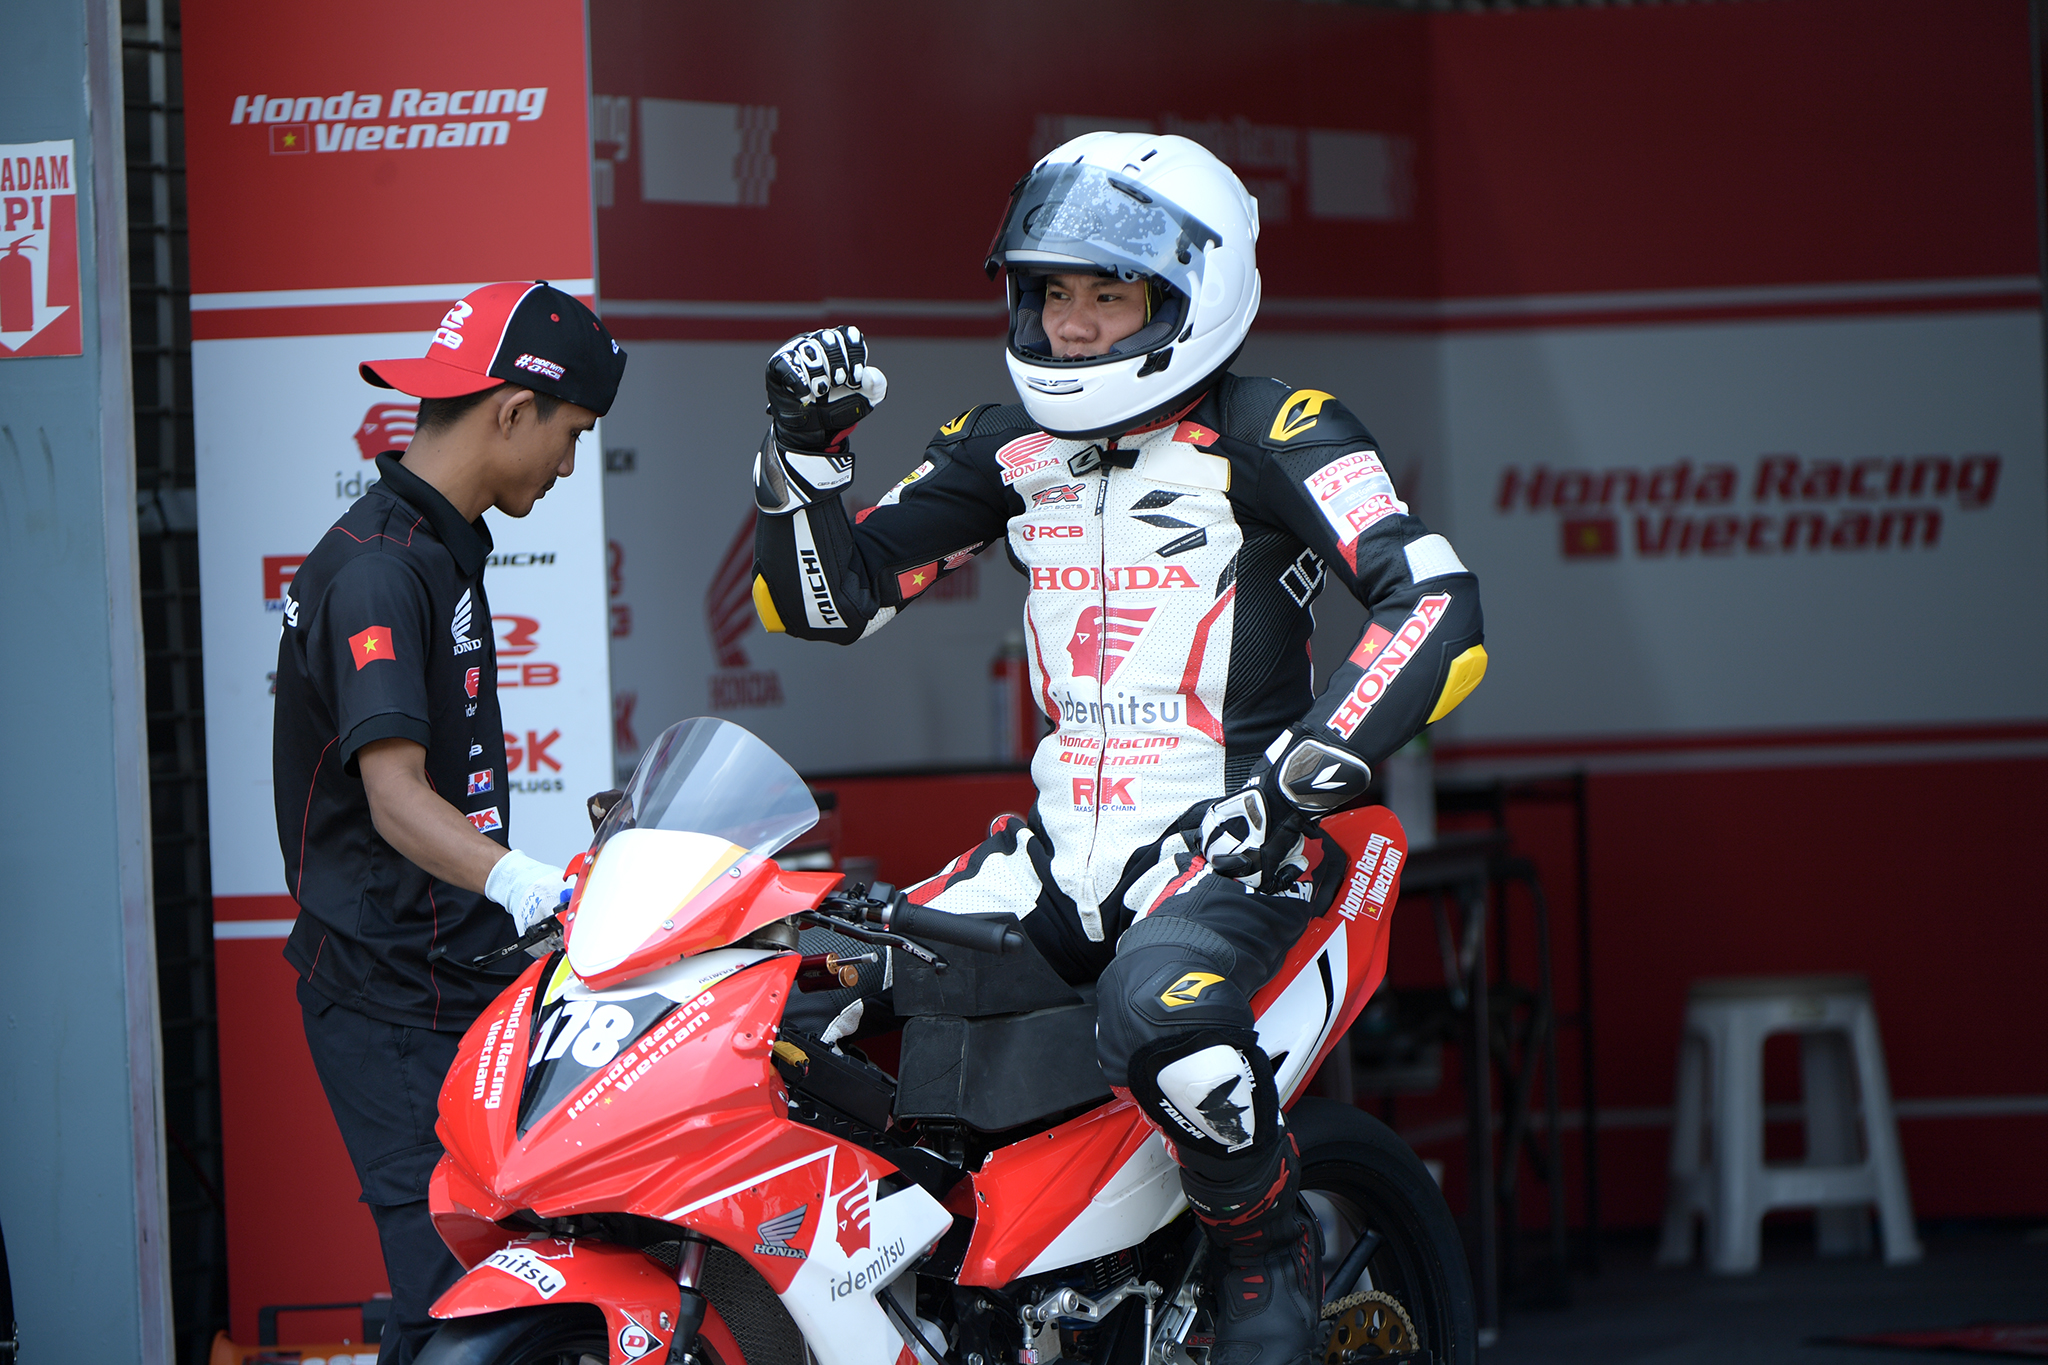 Race 1 Results Stage 2 ARRC 2023: Nguyễn Anh Tuấn surprised with a top 10 finish - arrc-2023-race1-01.jpg